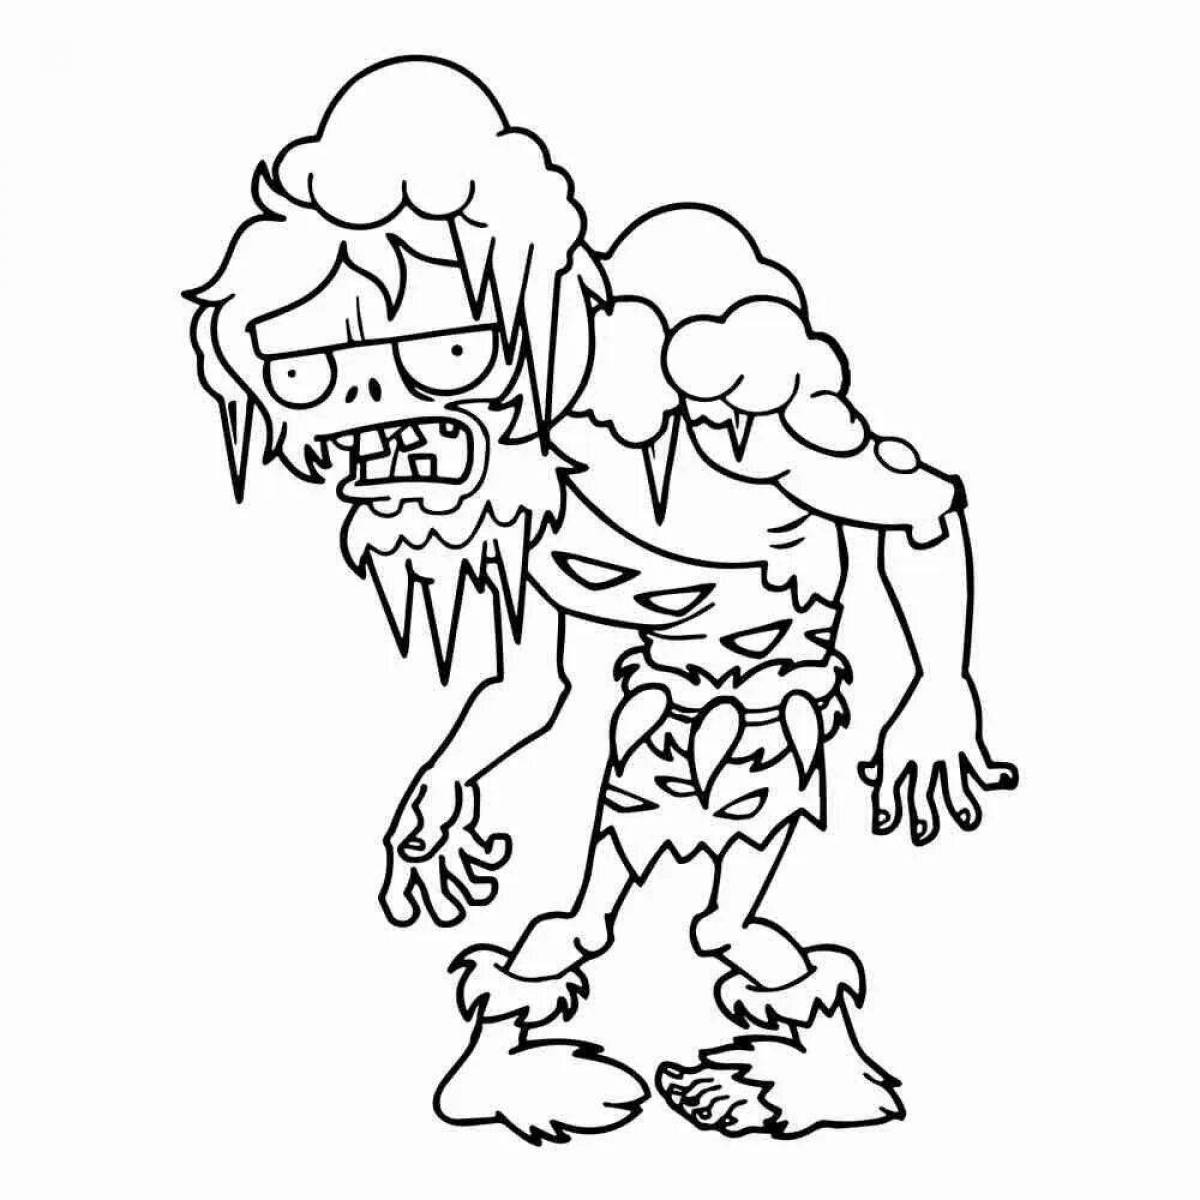 Shocking zombie coloring page